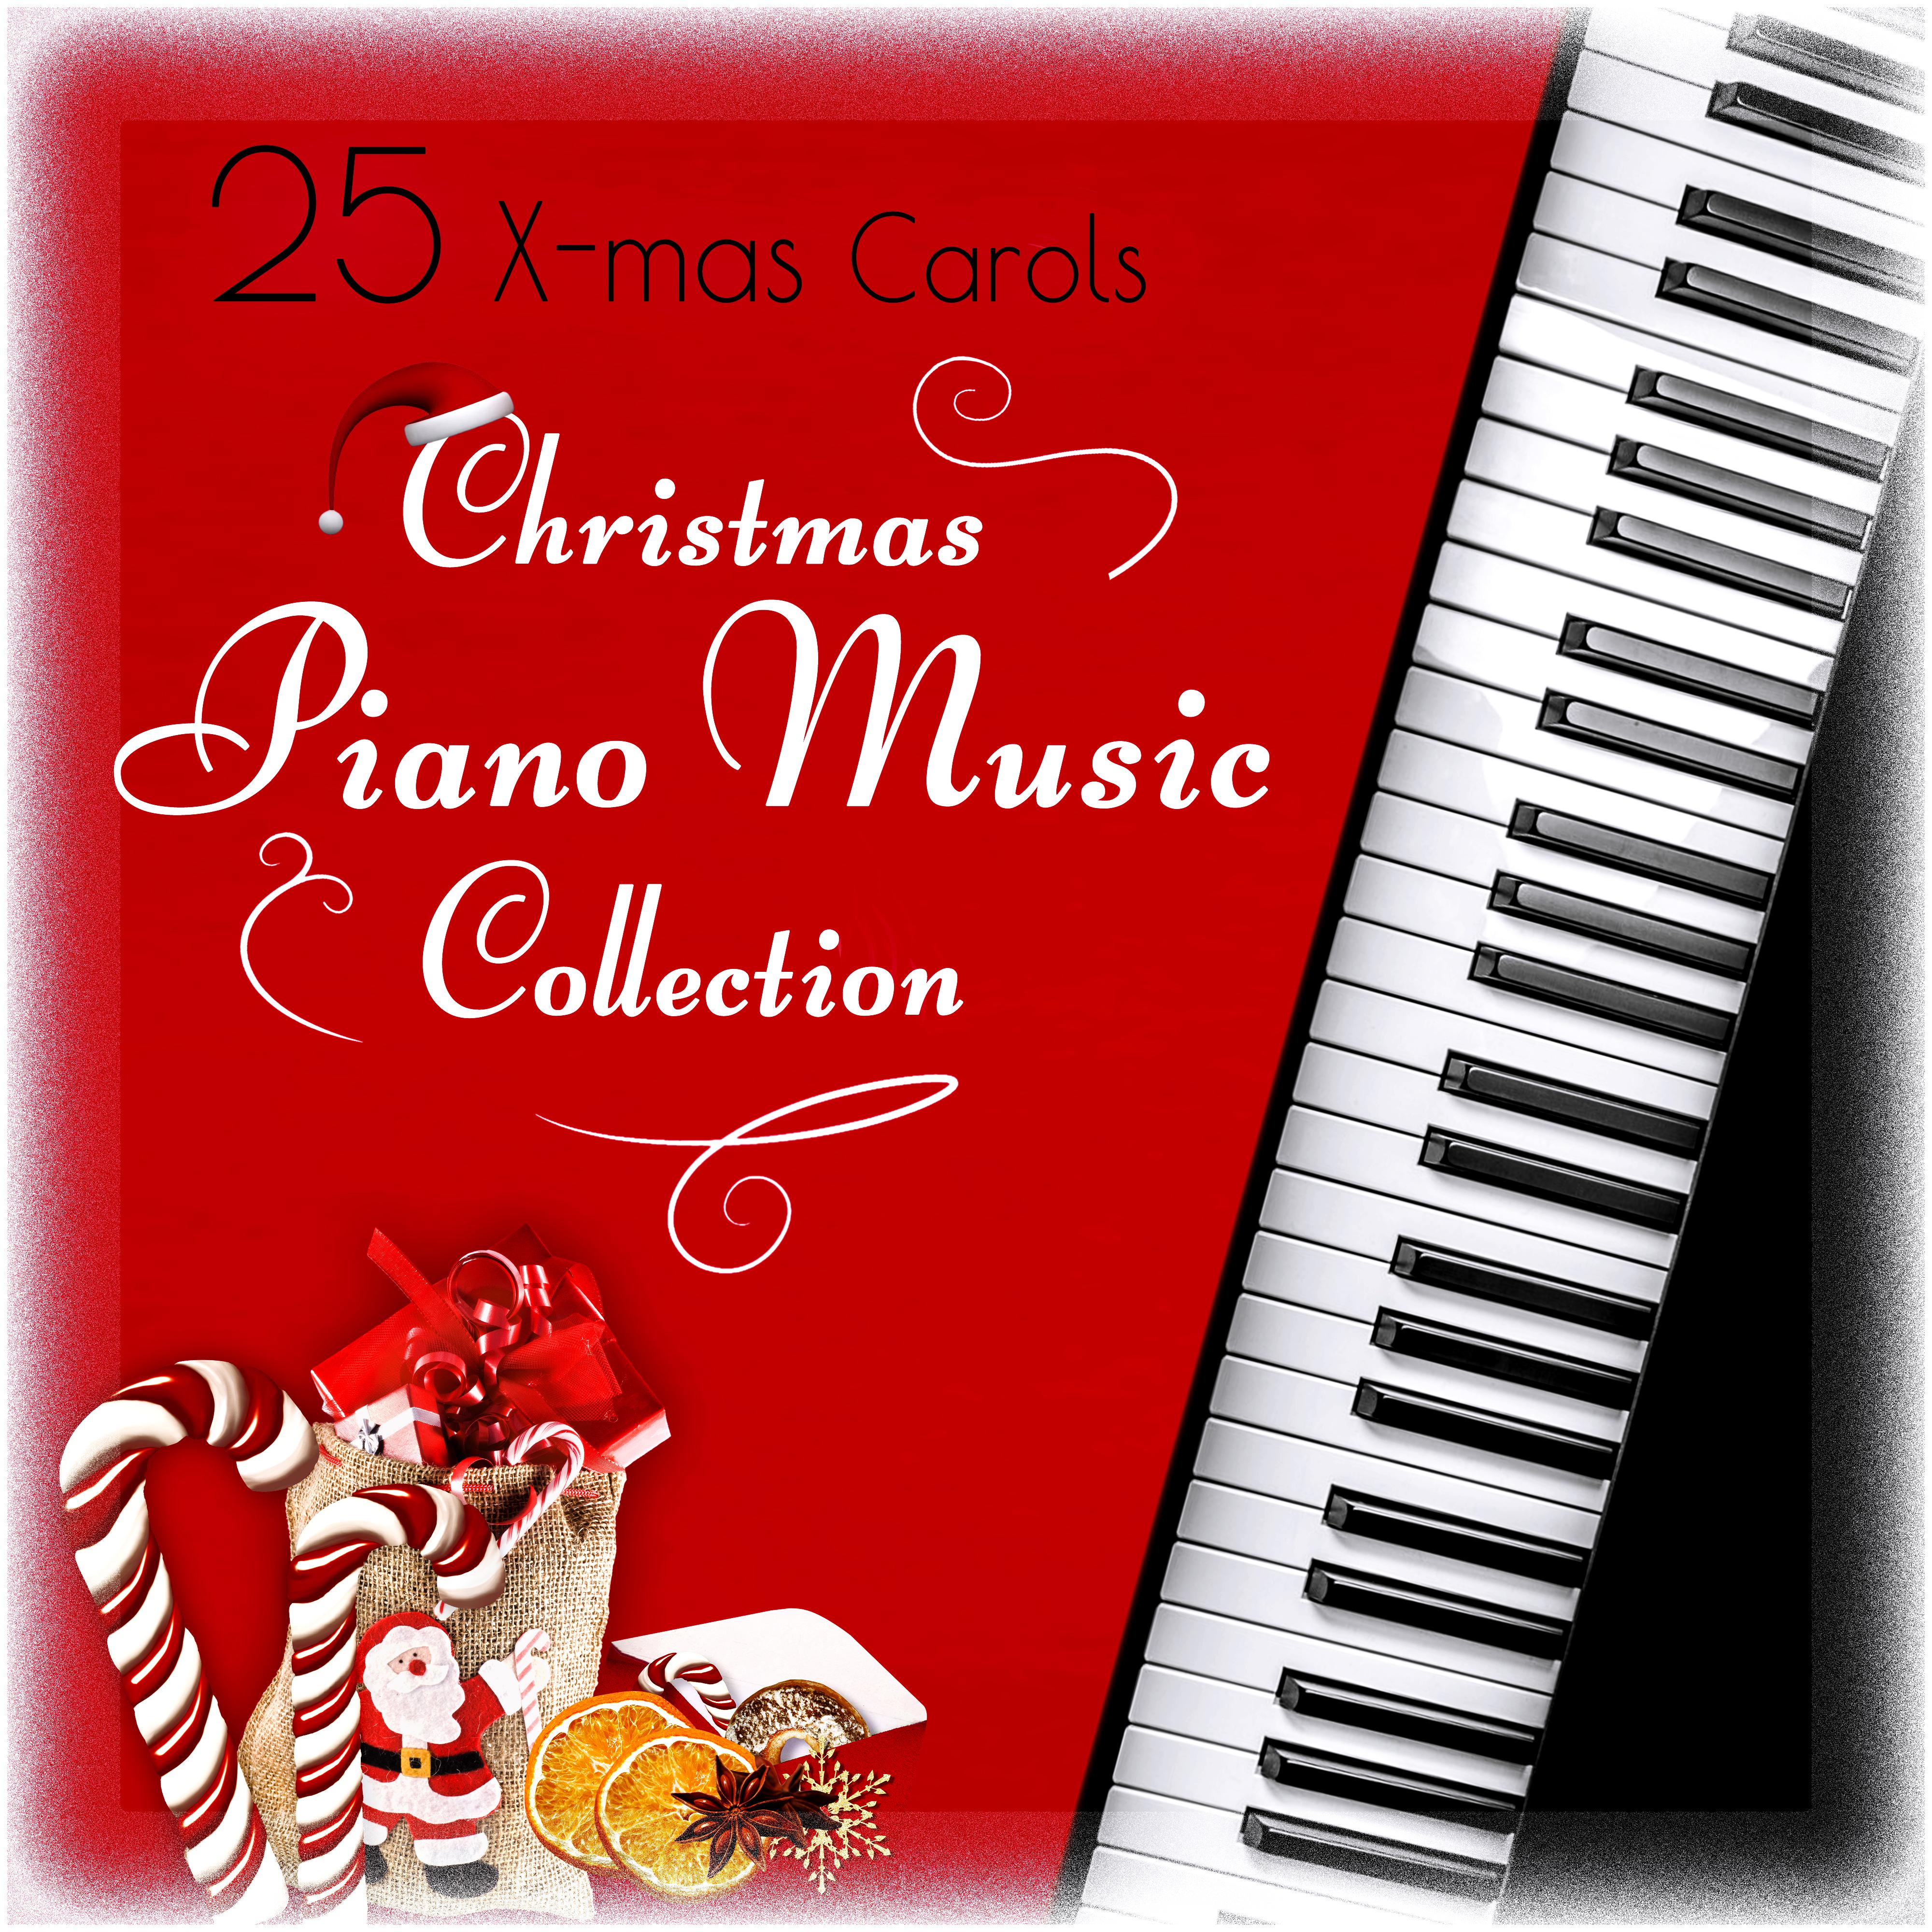 25 Xmas Carols: The Best Christmas Piano Collection  Traditional Music and Beautiful Songs for Kids and Adult, Family Christmas Time  Magic Holidays